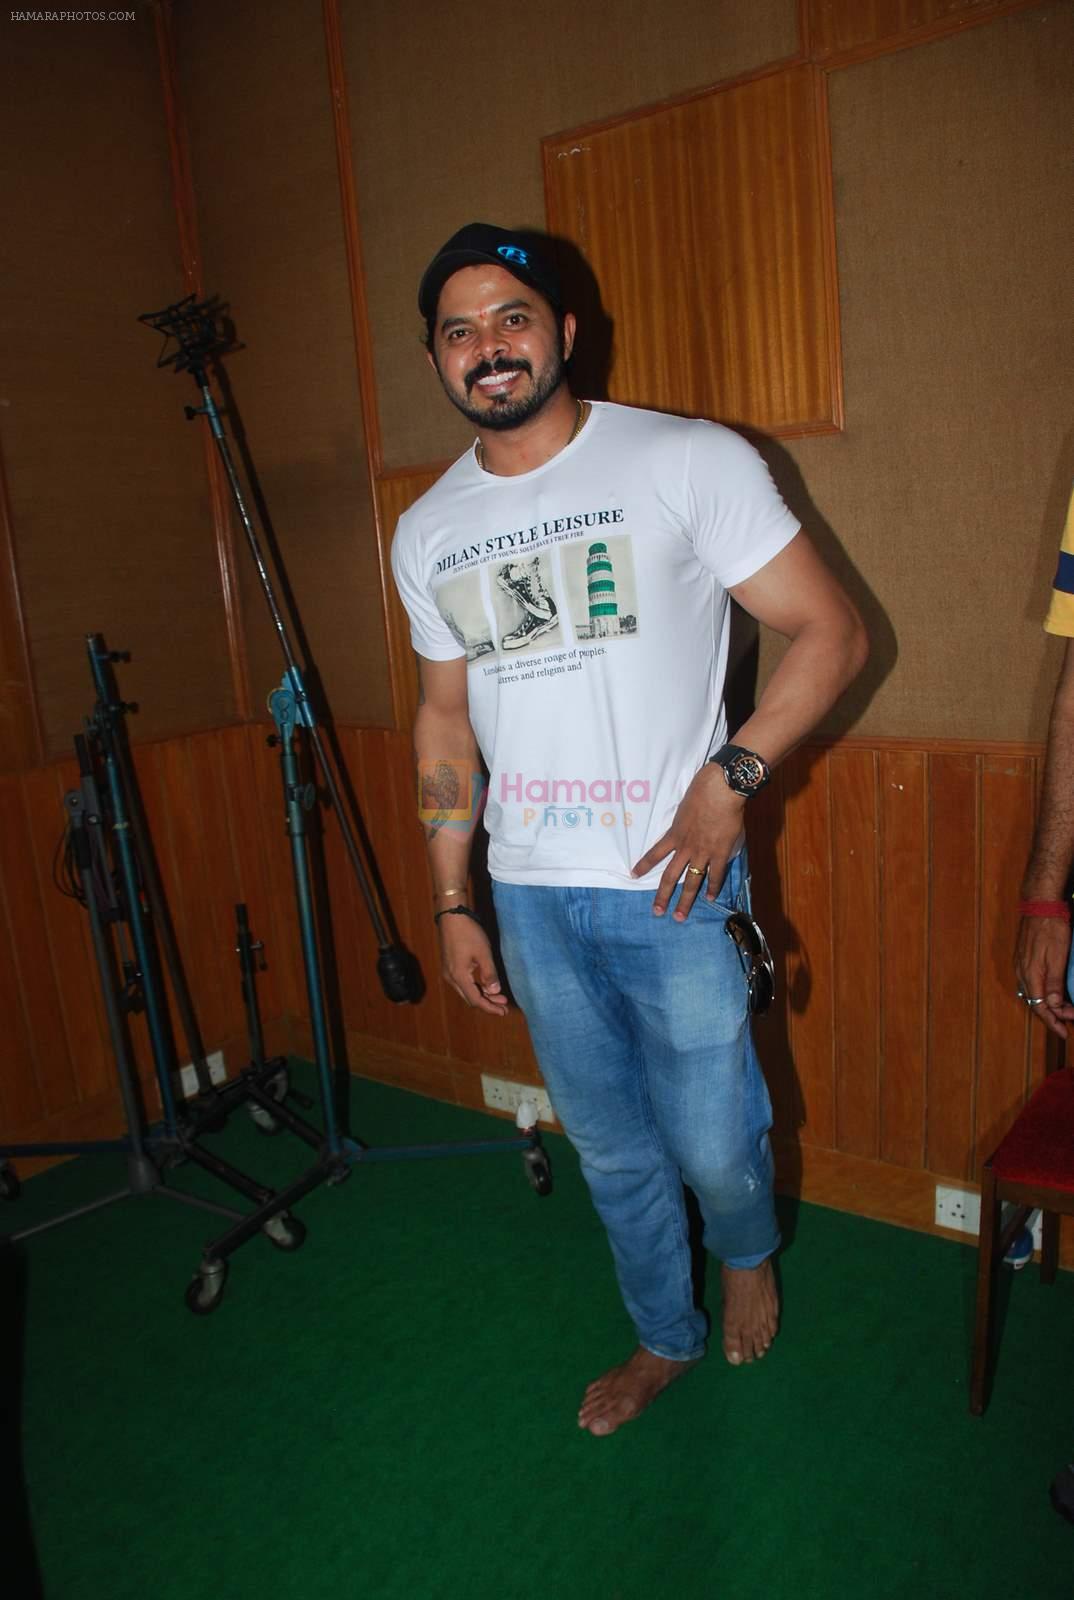 Sreesanth at song recording in Mumbai on 12th March 2015